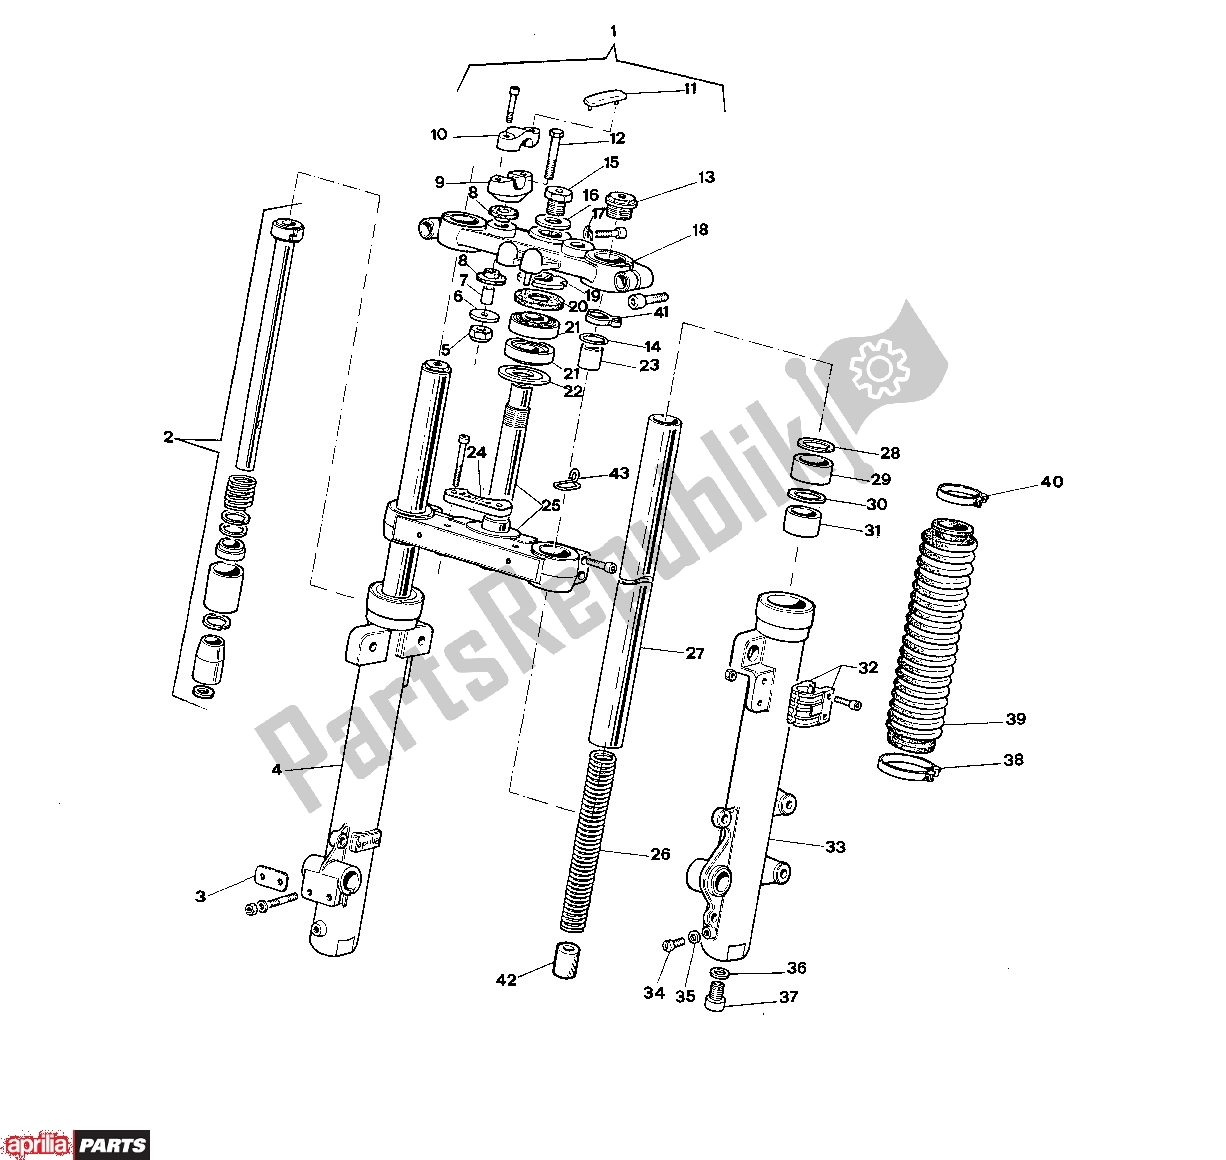 All parts for the Front Fork of the Aprilia Tuareg Wind 252 350 1986 - 1988